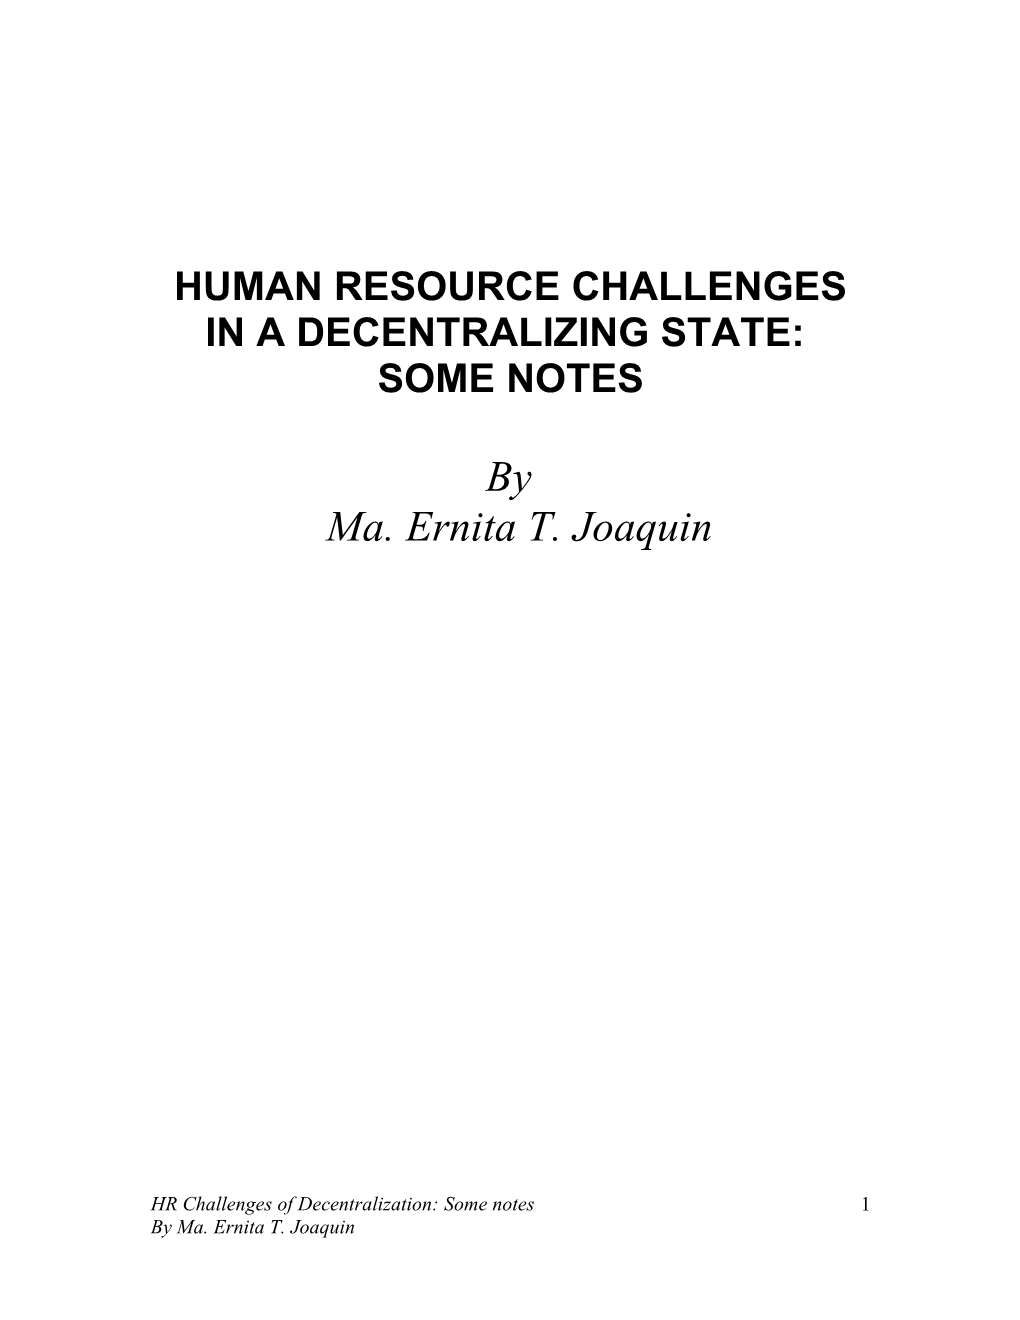 Hrm Challenges of a Decentralizing State